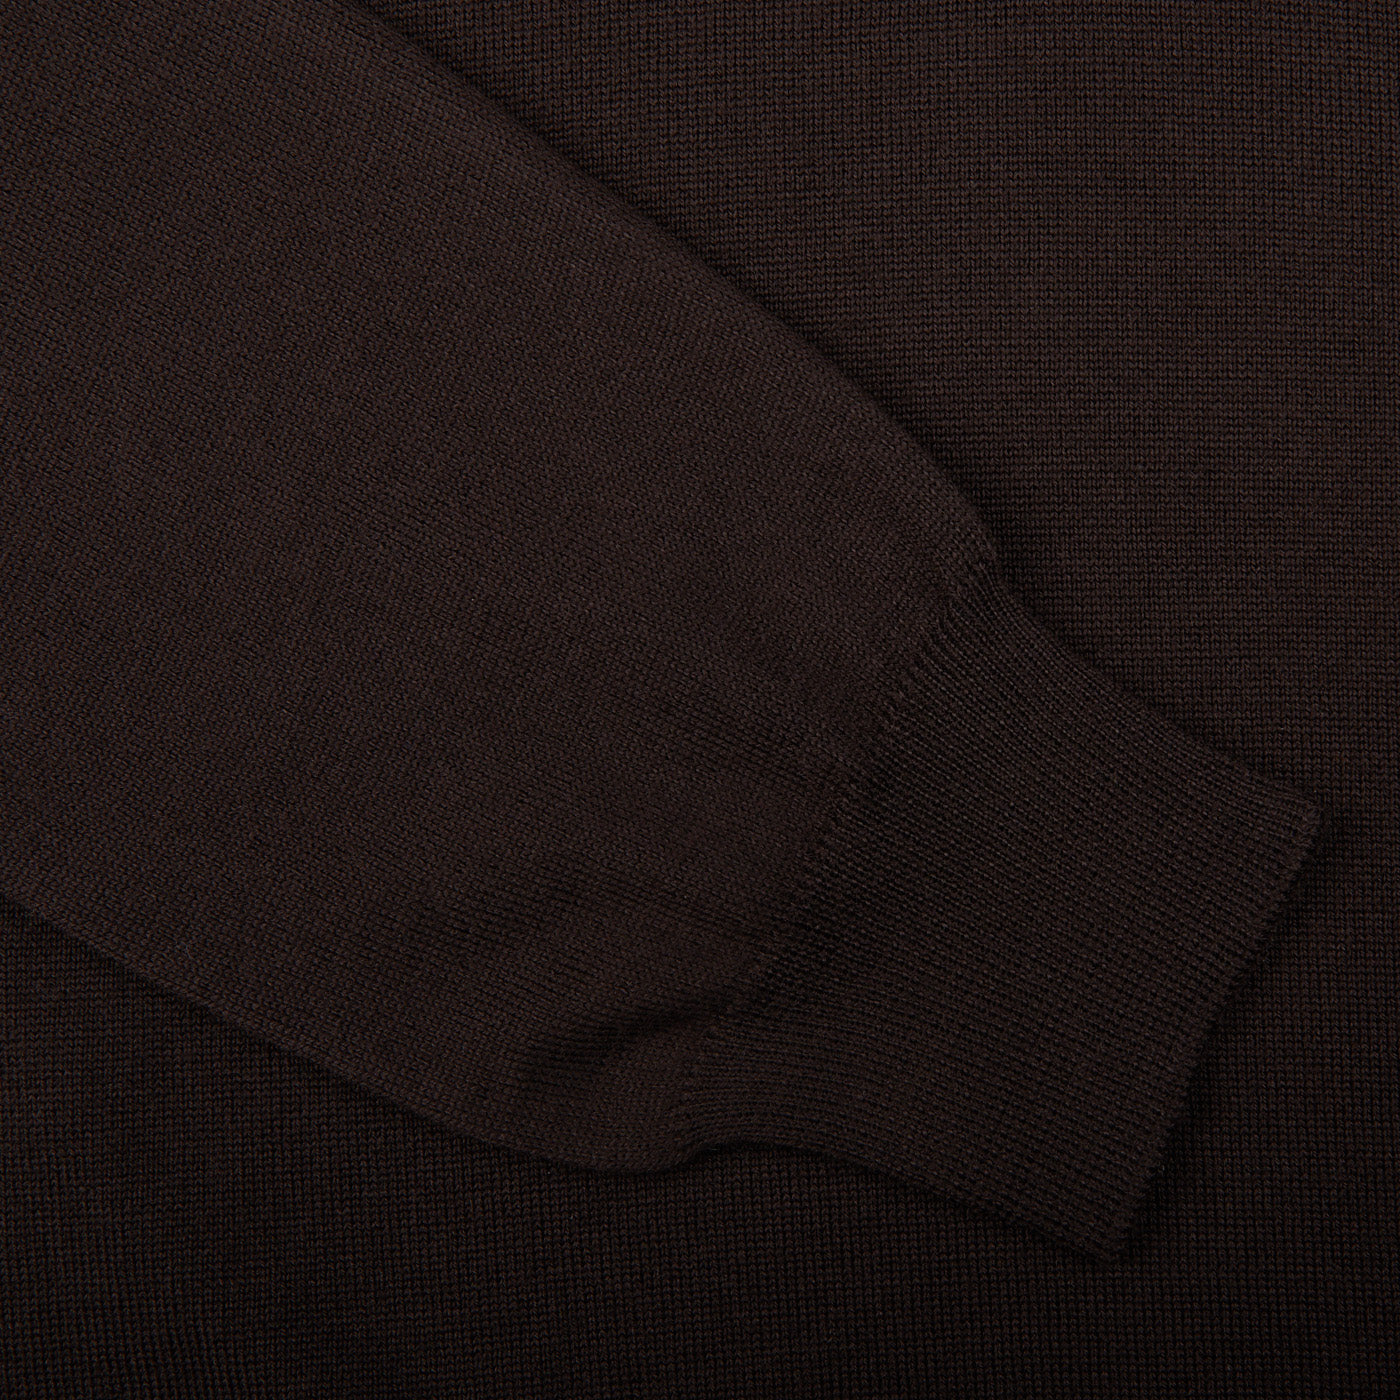 A close up of a Gran Sasso dark brown sweater made with merino wool.